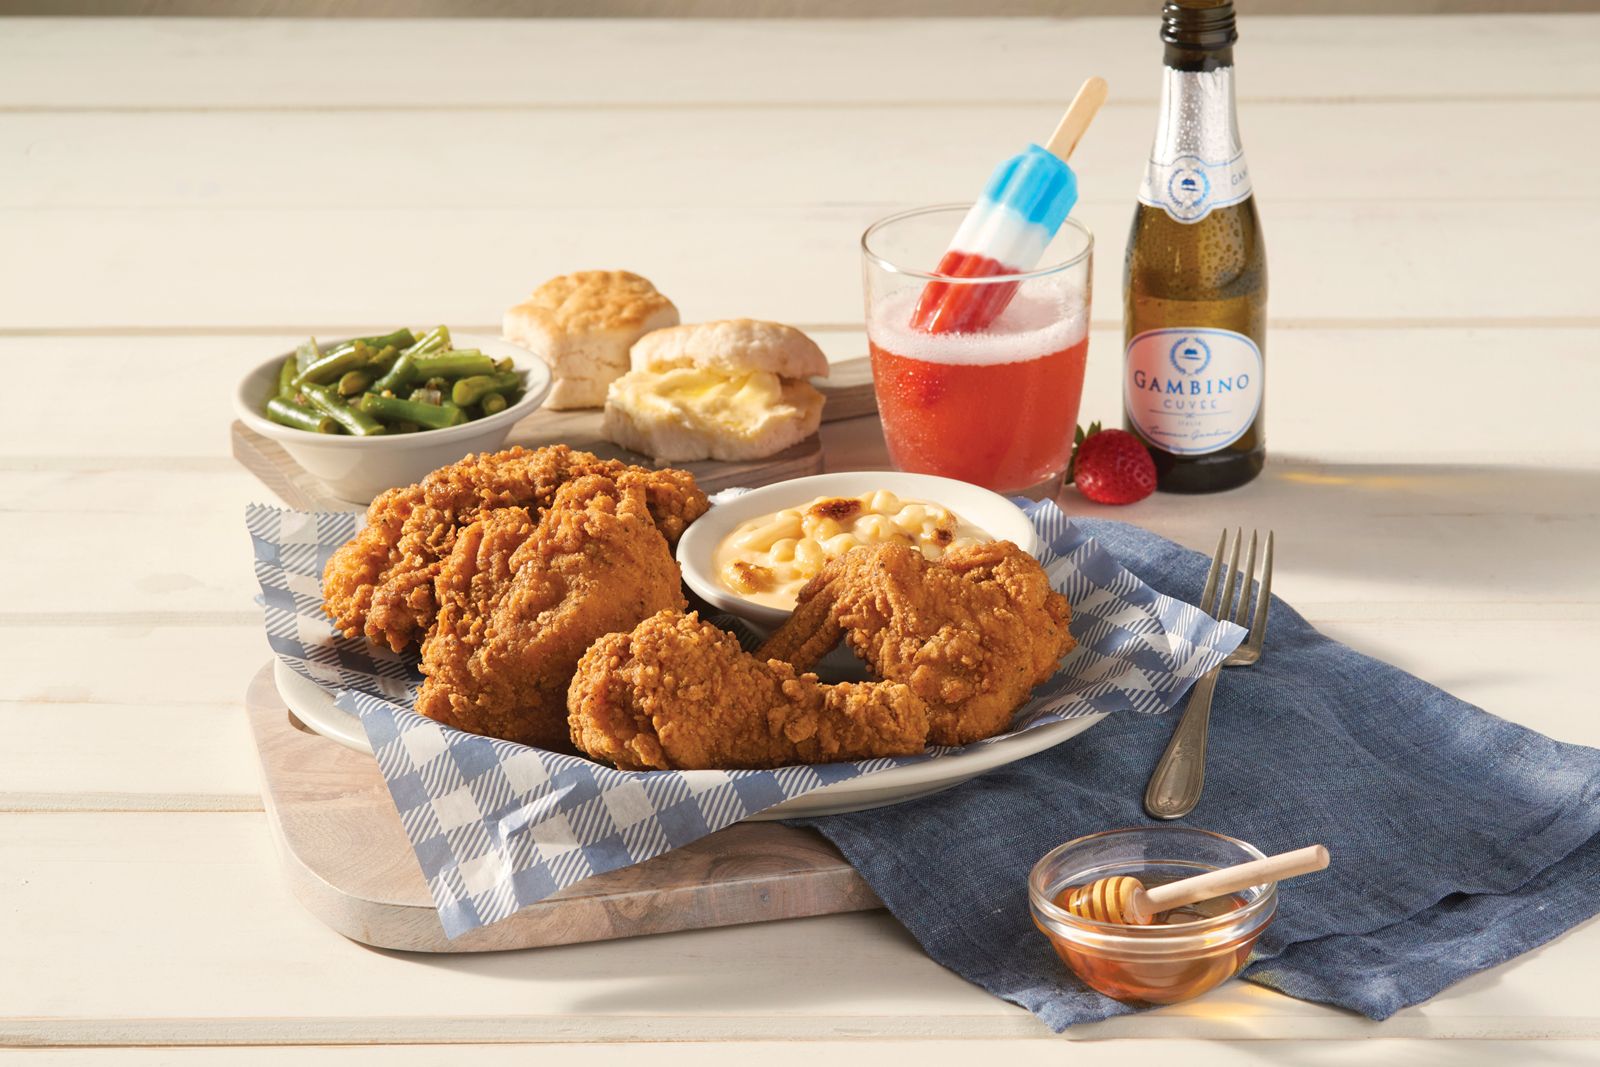 Cracker Barrel Old Country Store Celebrates Summer with Variety of Deals, Sweet Summer Refreshments